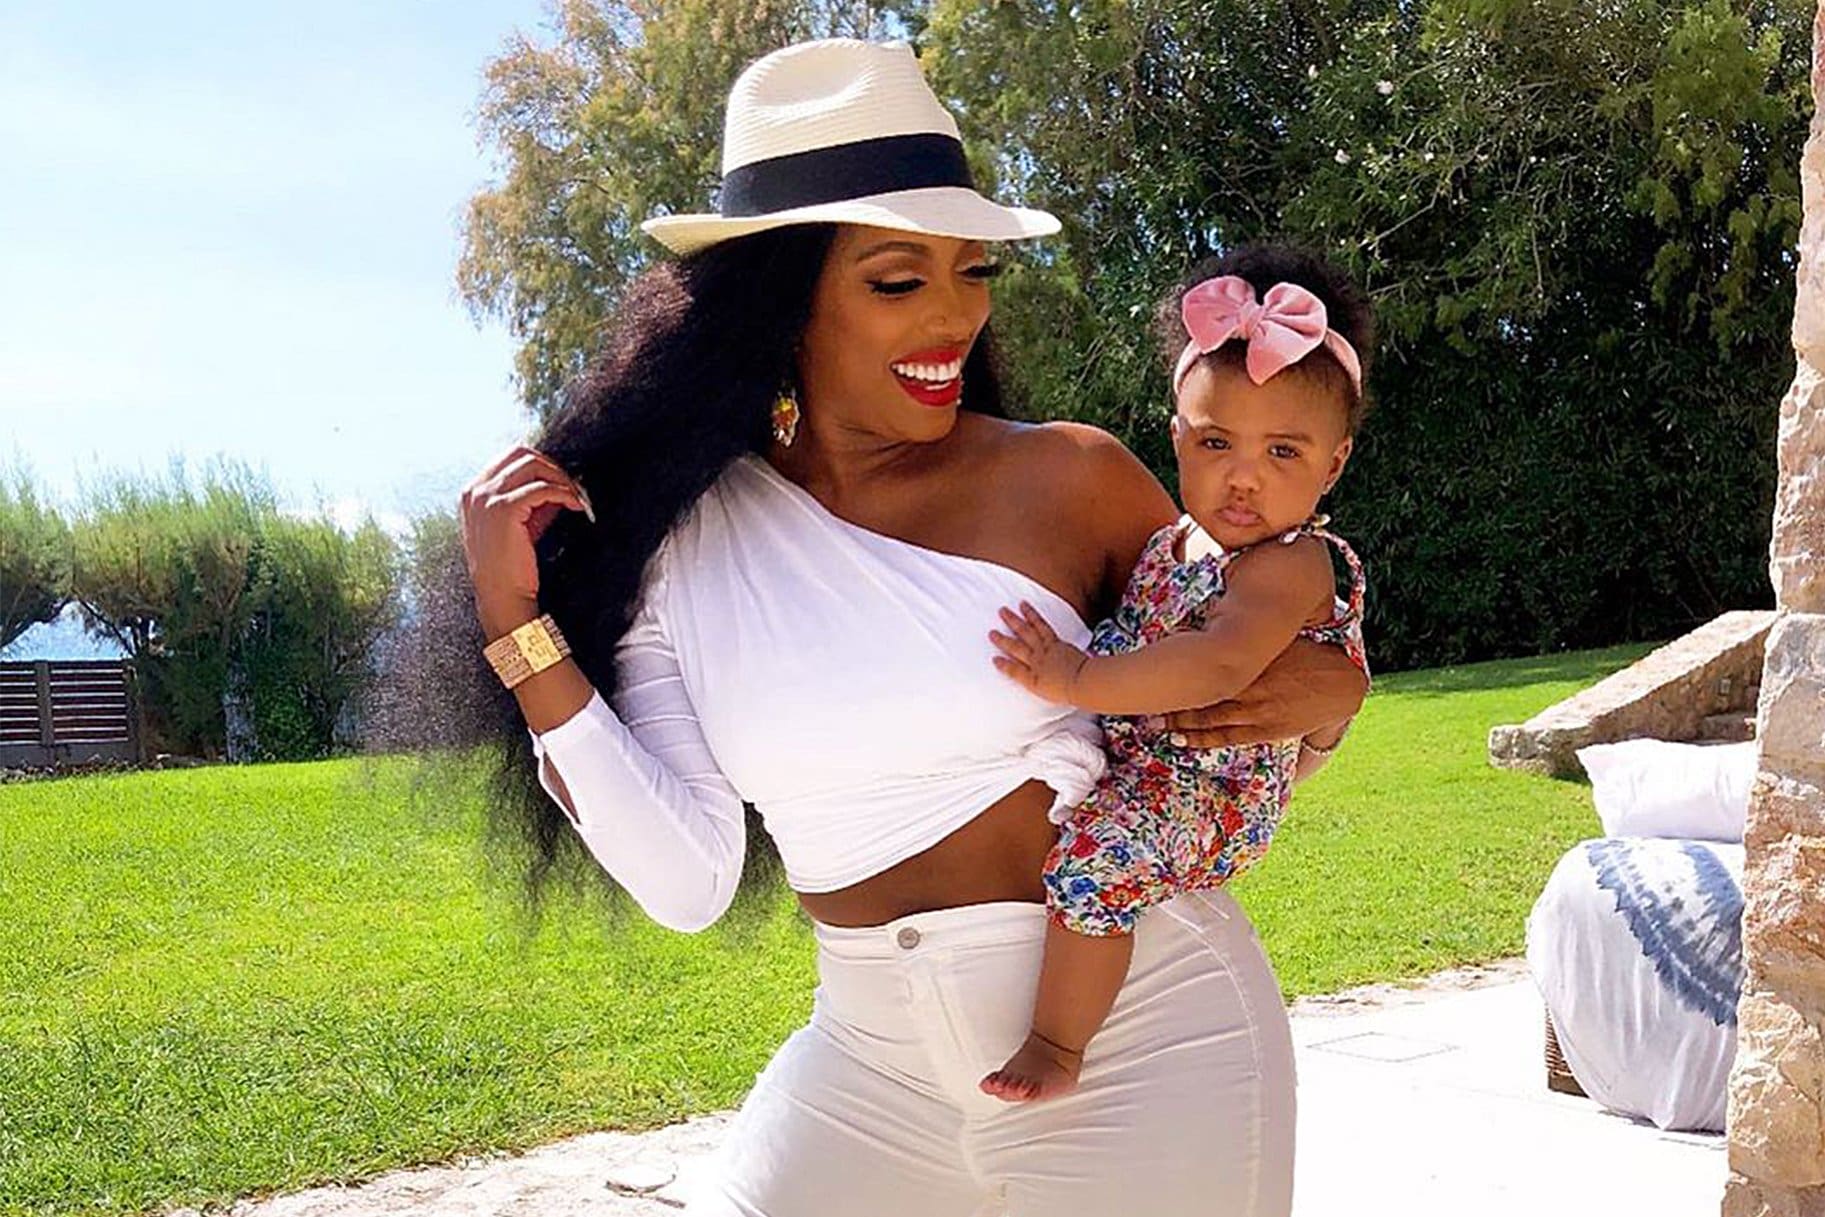 Porsha Williams Celebrates The Birthday Of Her Gorgeous Niece, Kayla - See The Girl With Beautiful Baby PJ